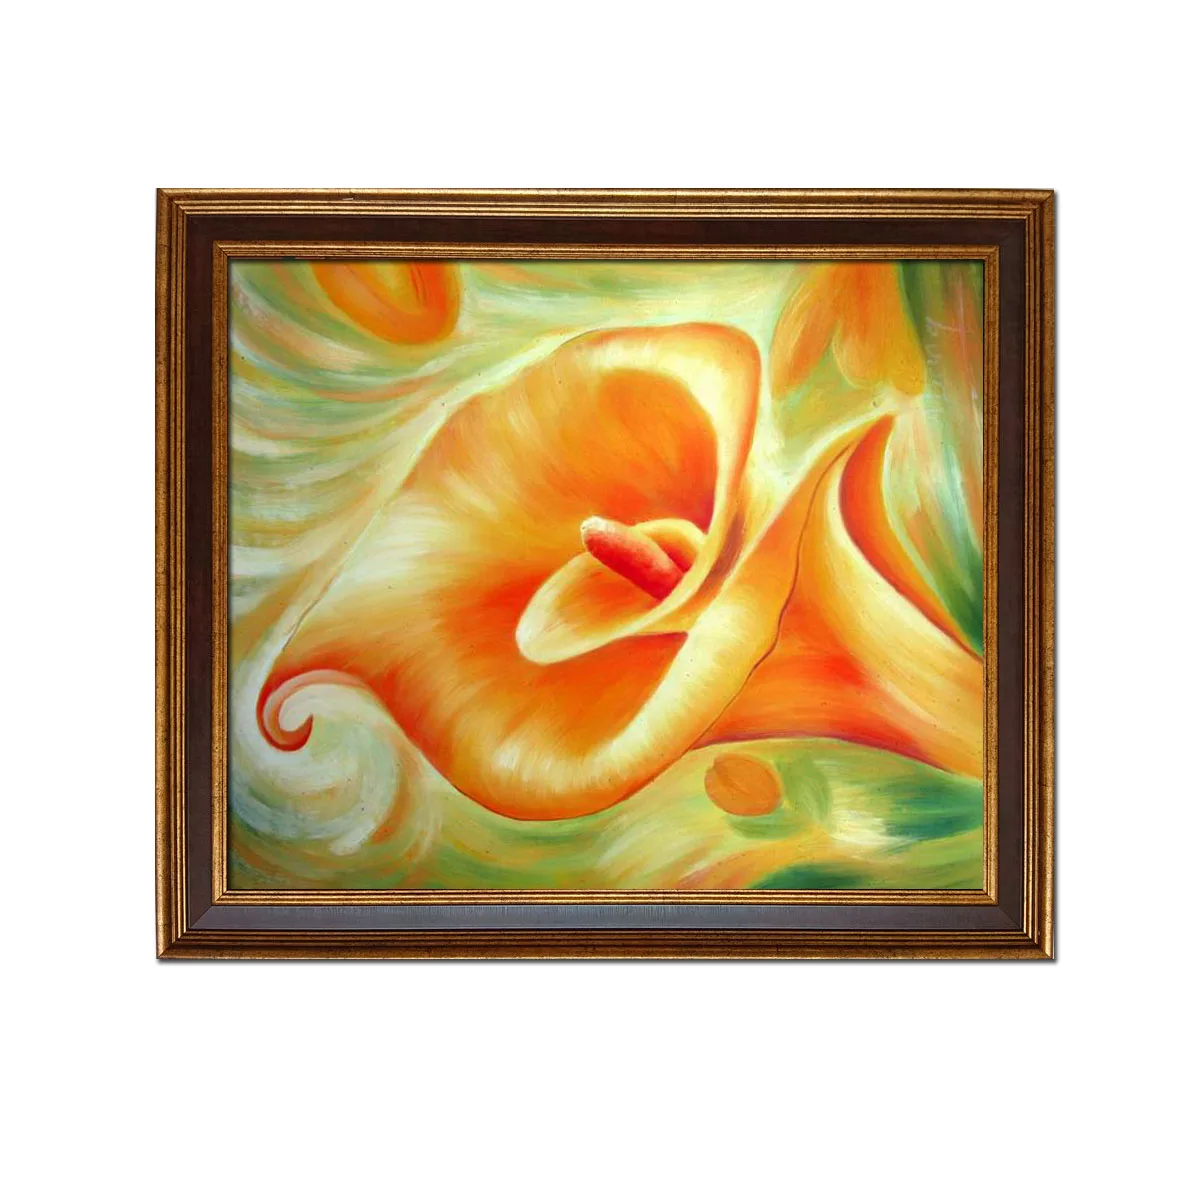 

Golden Framed-Hand Painted Still life Calla Lily Flowers Oil Painting Reproduction on Canvas Modern Wall Art Home Decor